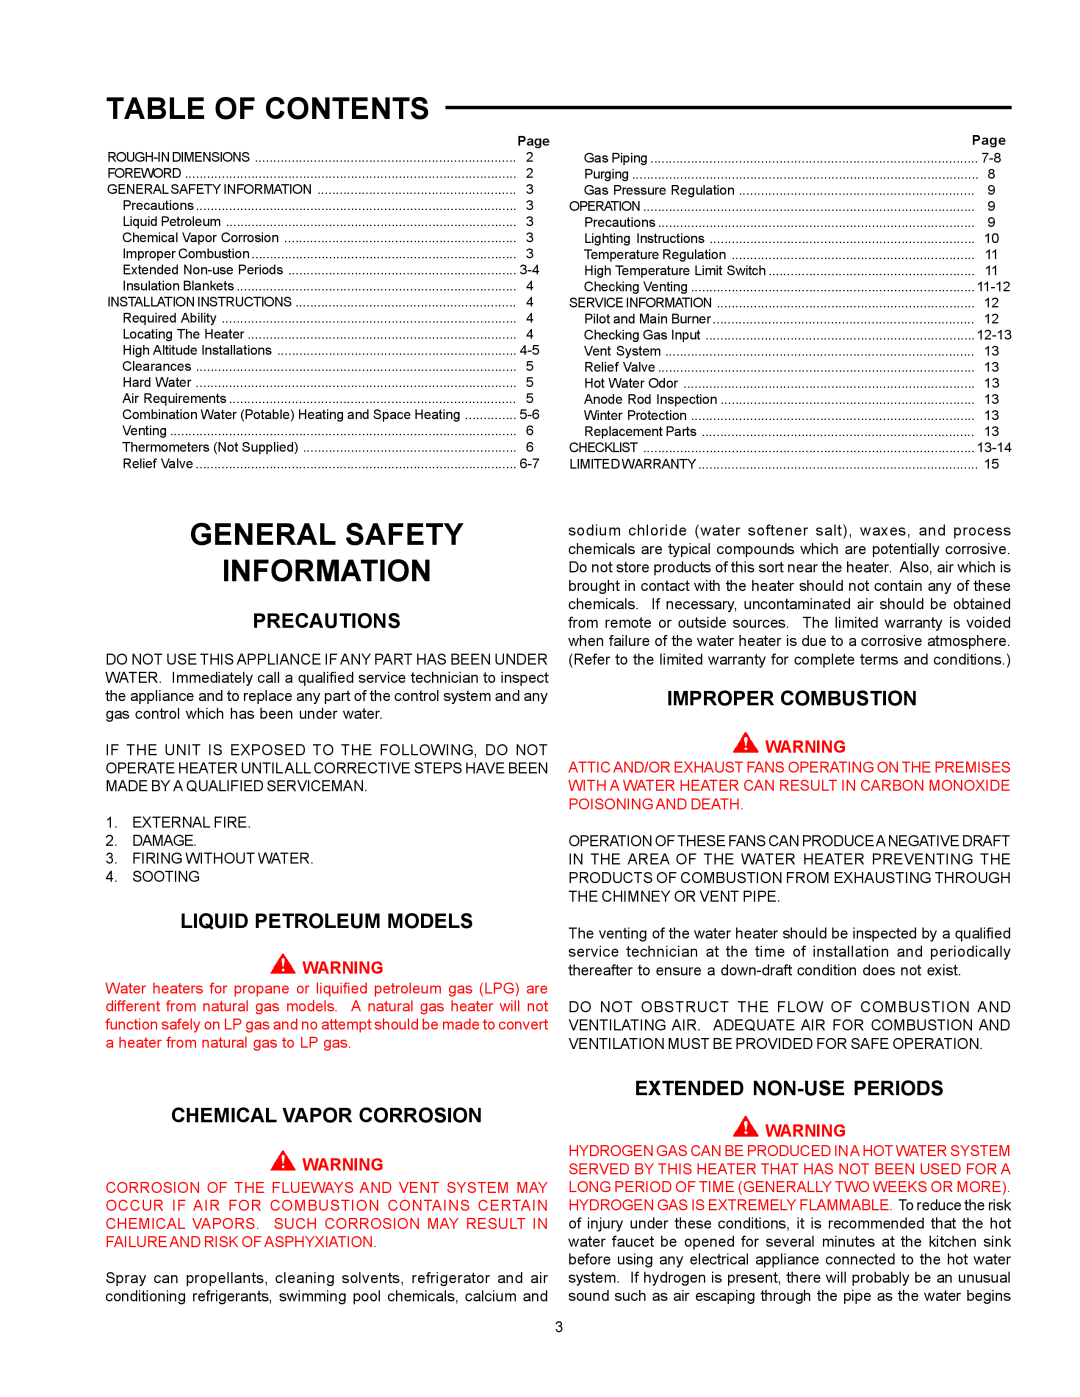 A.O. Smith BT- 65 warranty Table Of Contents, General Safety, Information, Precautions, Liquid Petroleum Models 